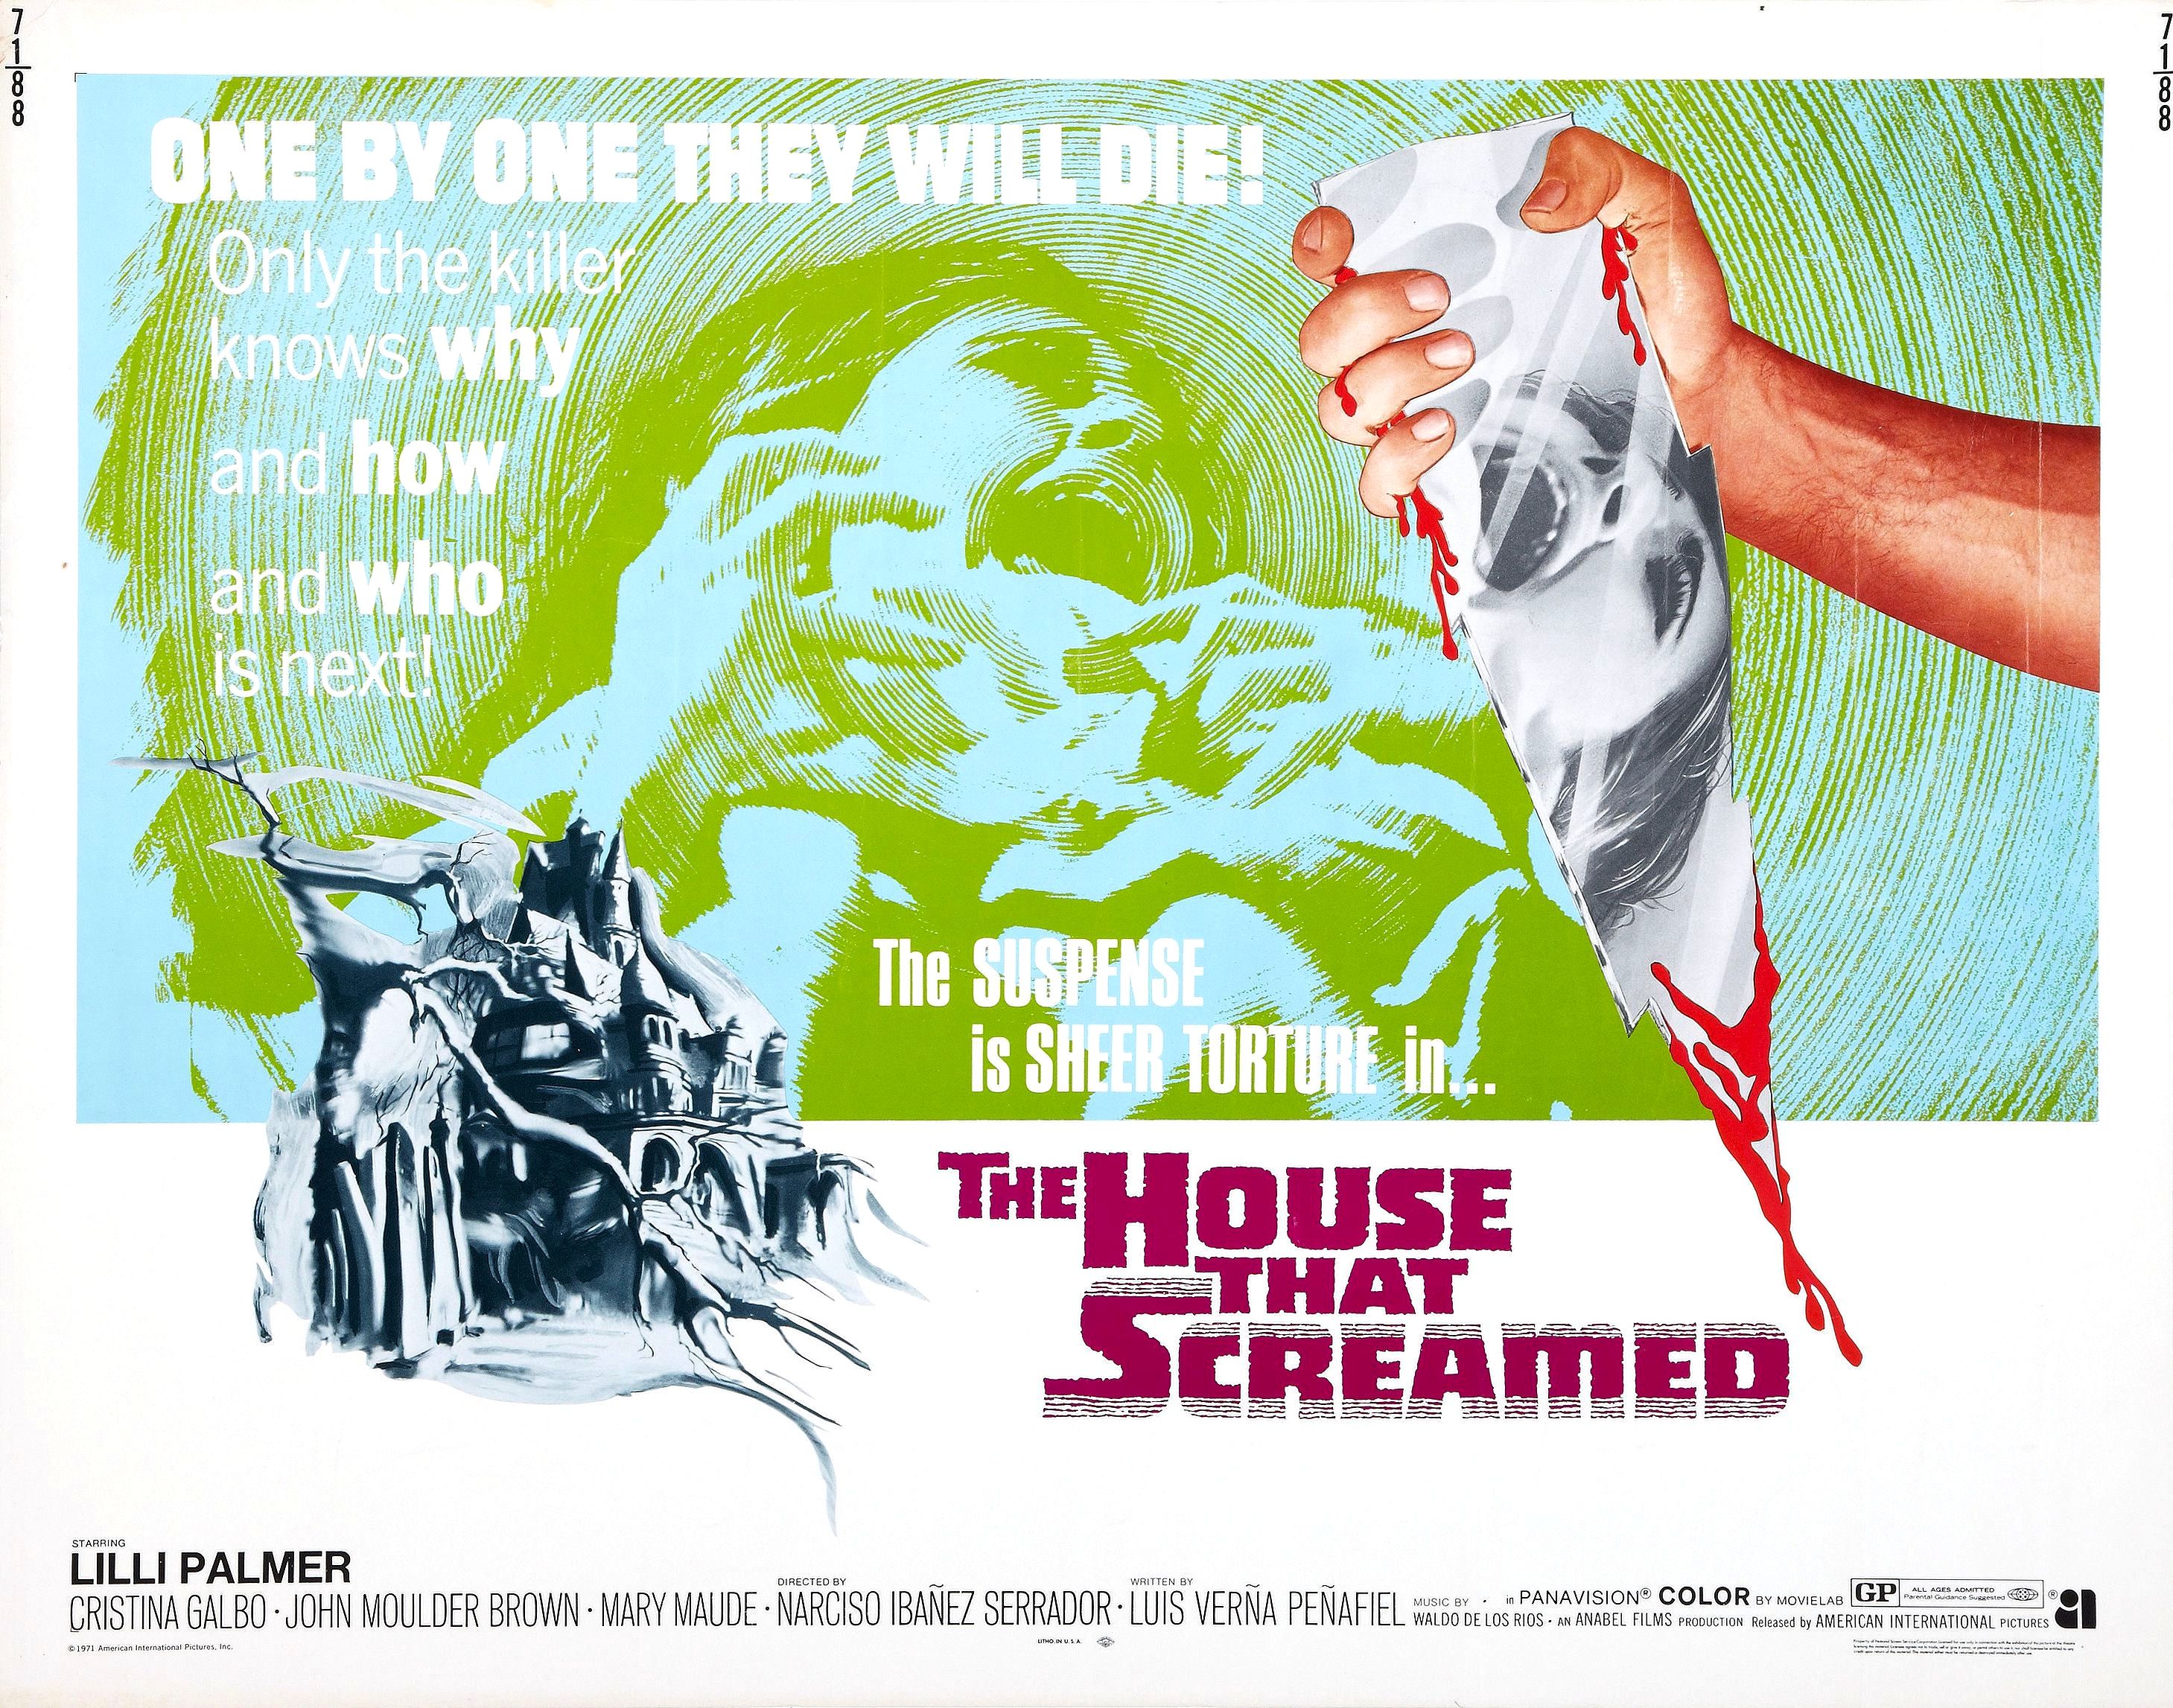 THE HOUSE THAT SCREAMED… “MURDER!”